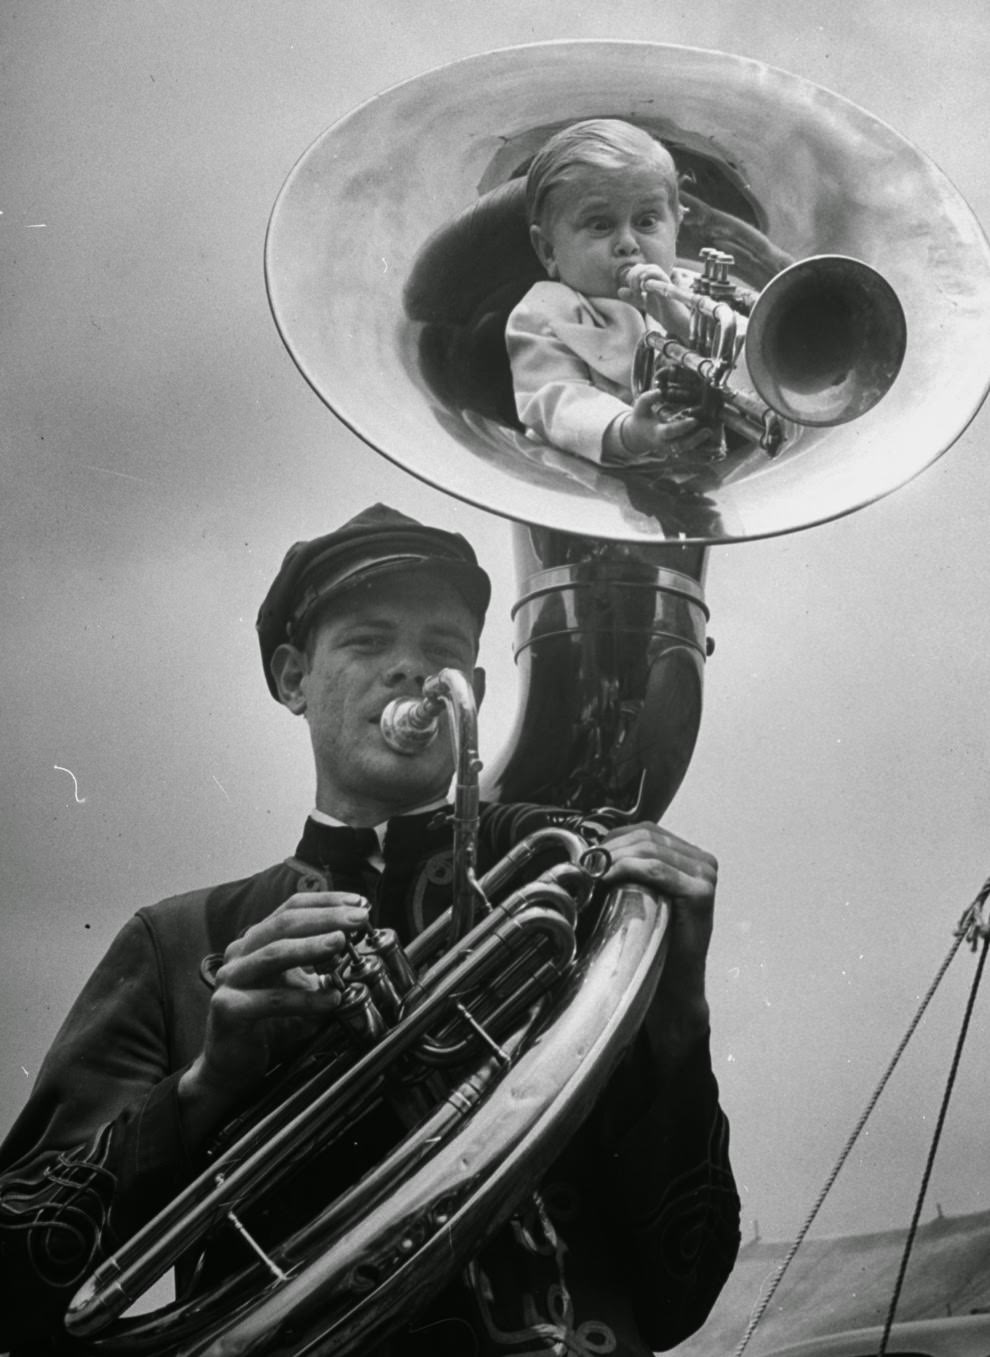 Czech showman Baron Richard Nowak, 19, stands 21 inches high & weighs 17 lbs., blowing on a trumpet as he nestles inside tuba player of the Hamid-Morton Circus, 1940